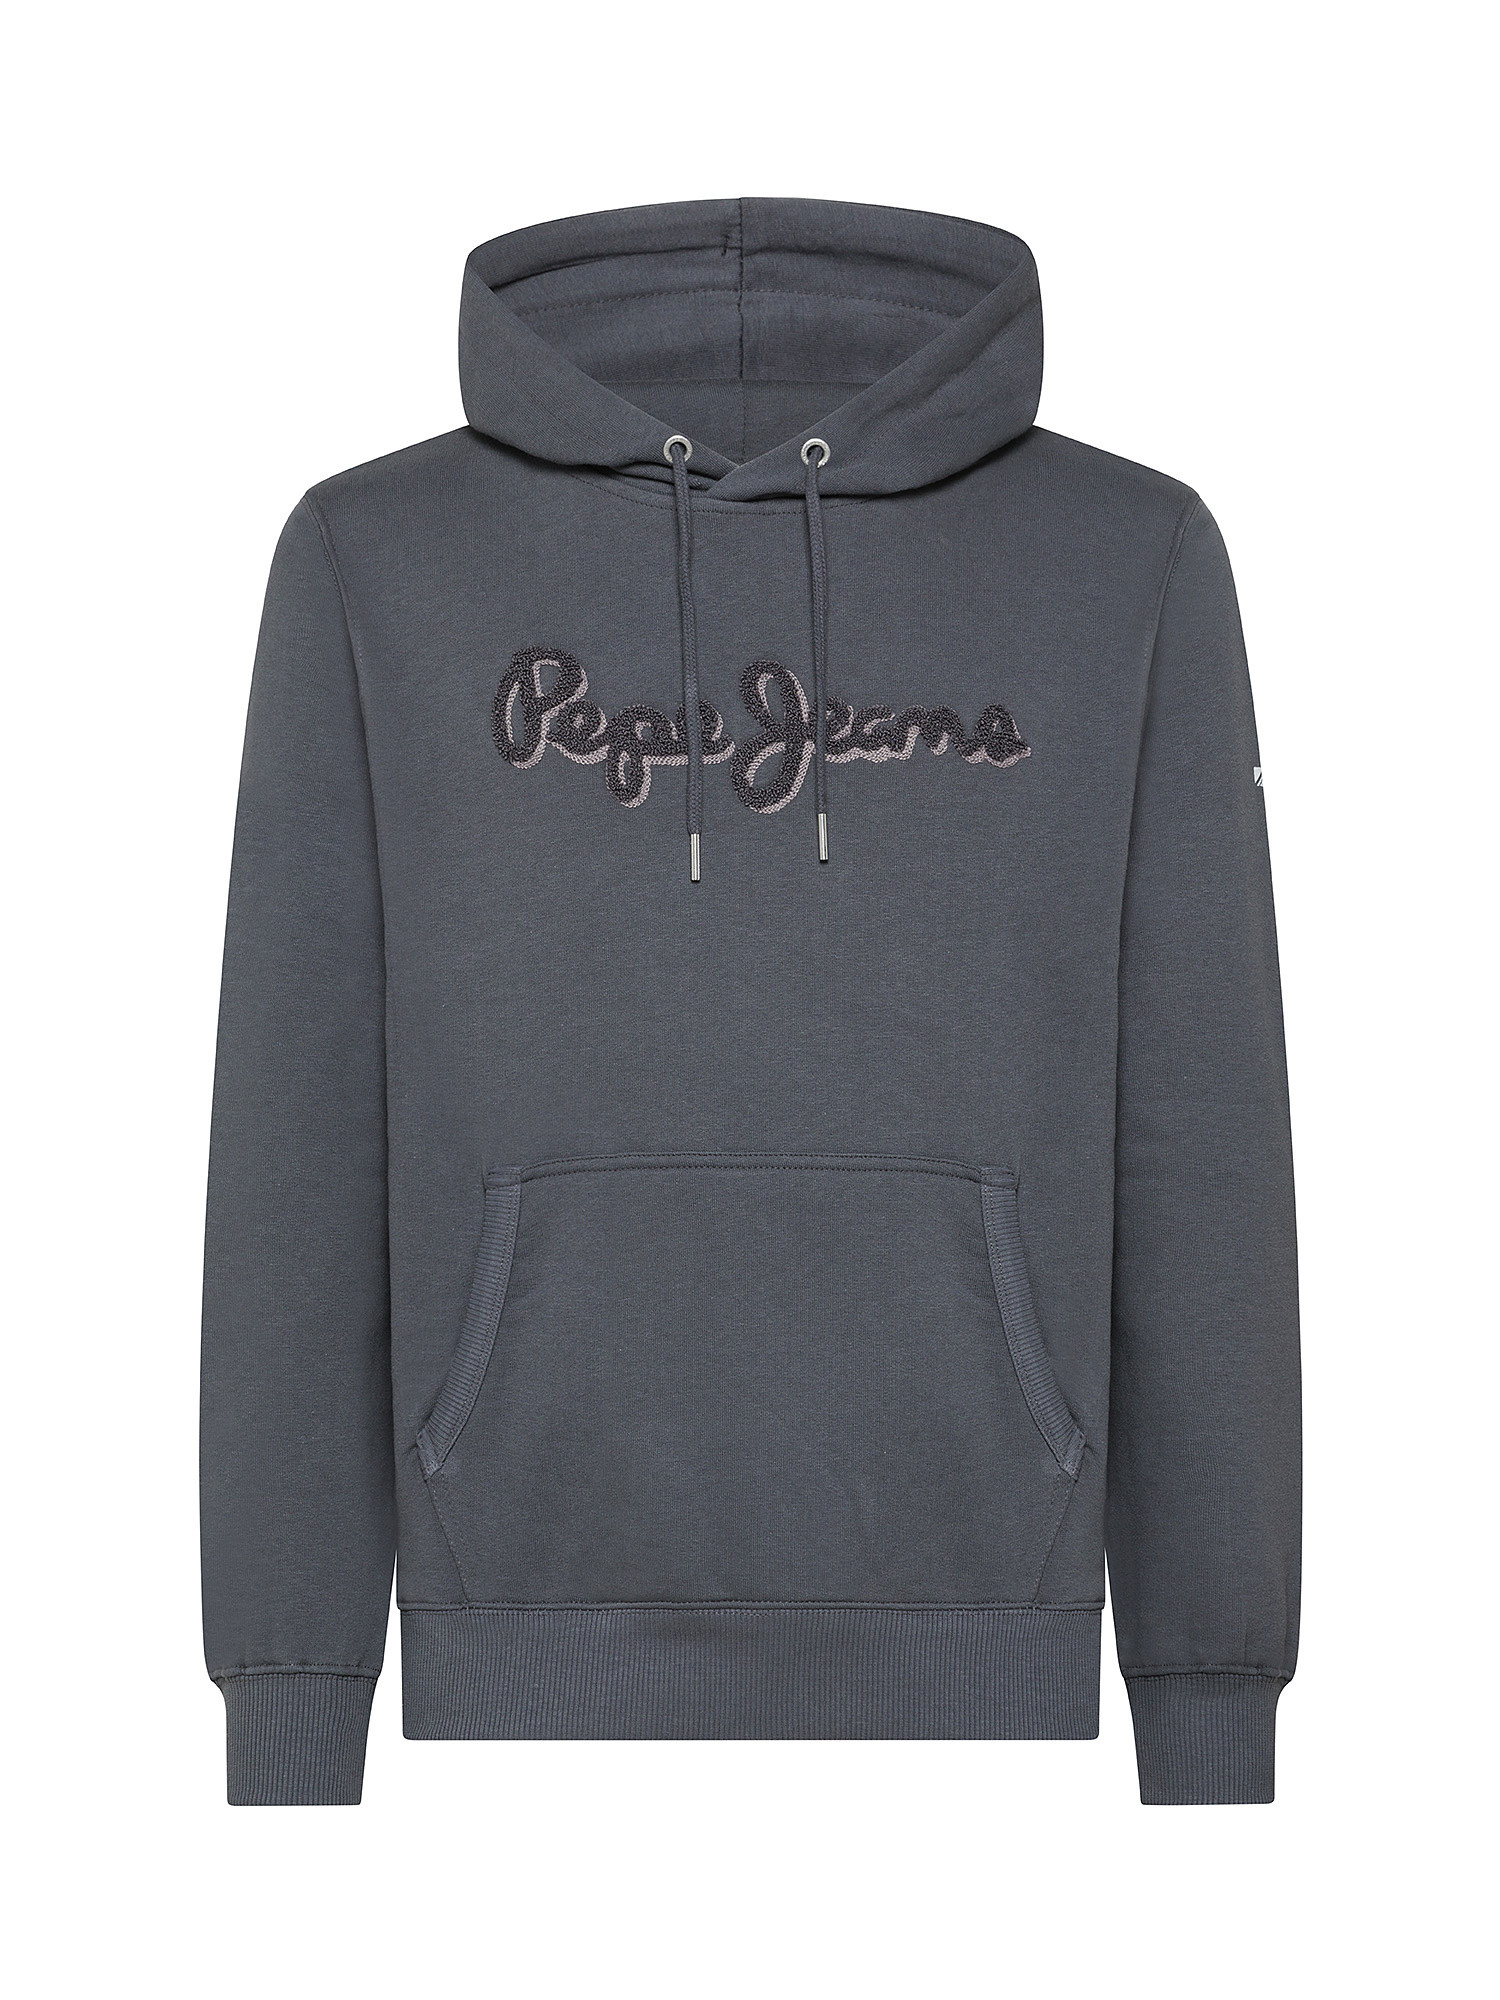 Pepe Jeans - Sweatshirt with hood and logo, Anthracite, large image number 0